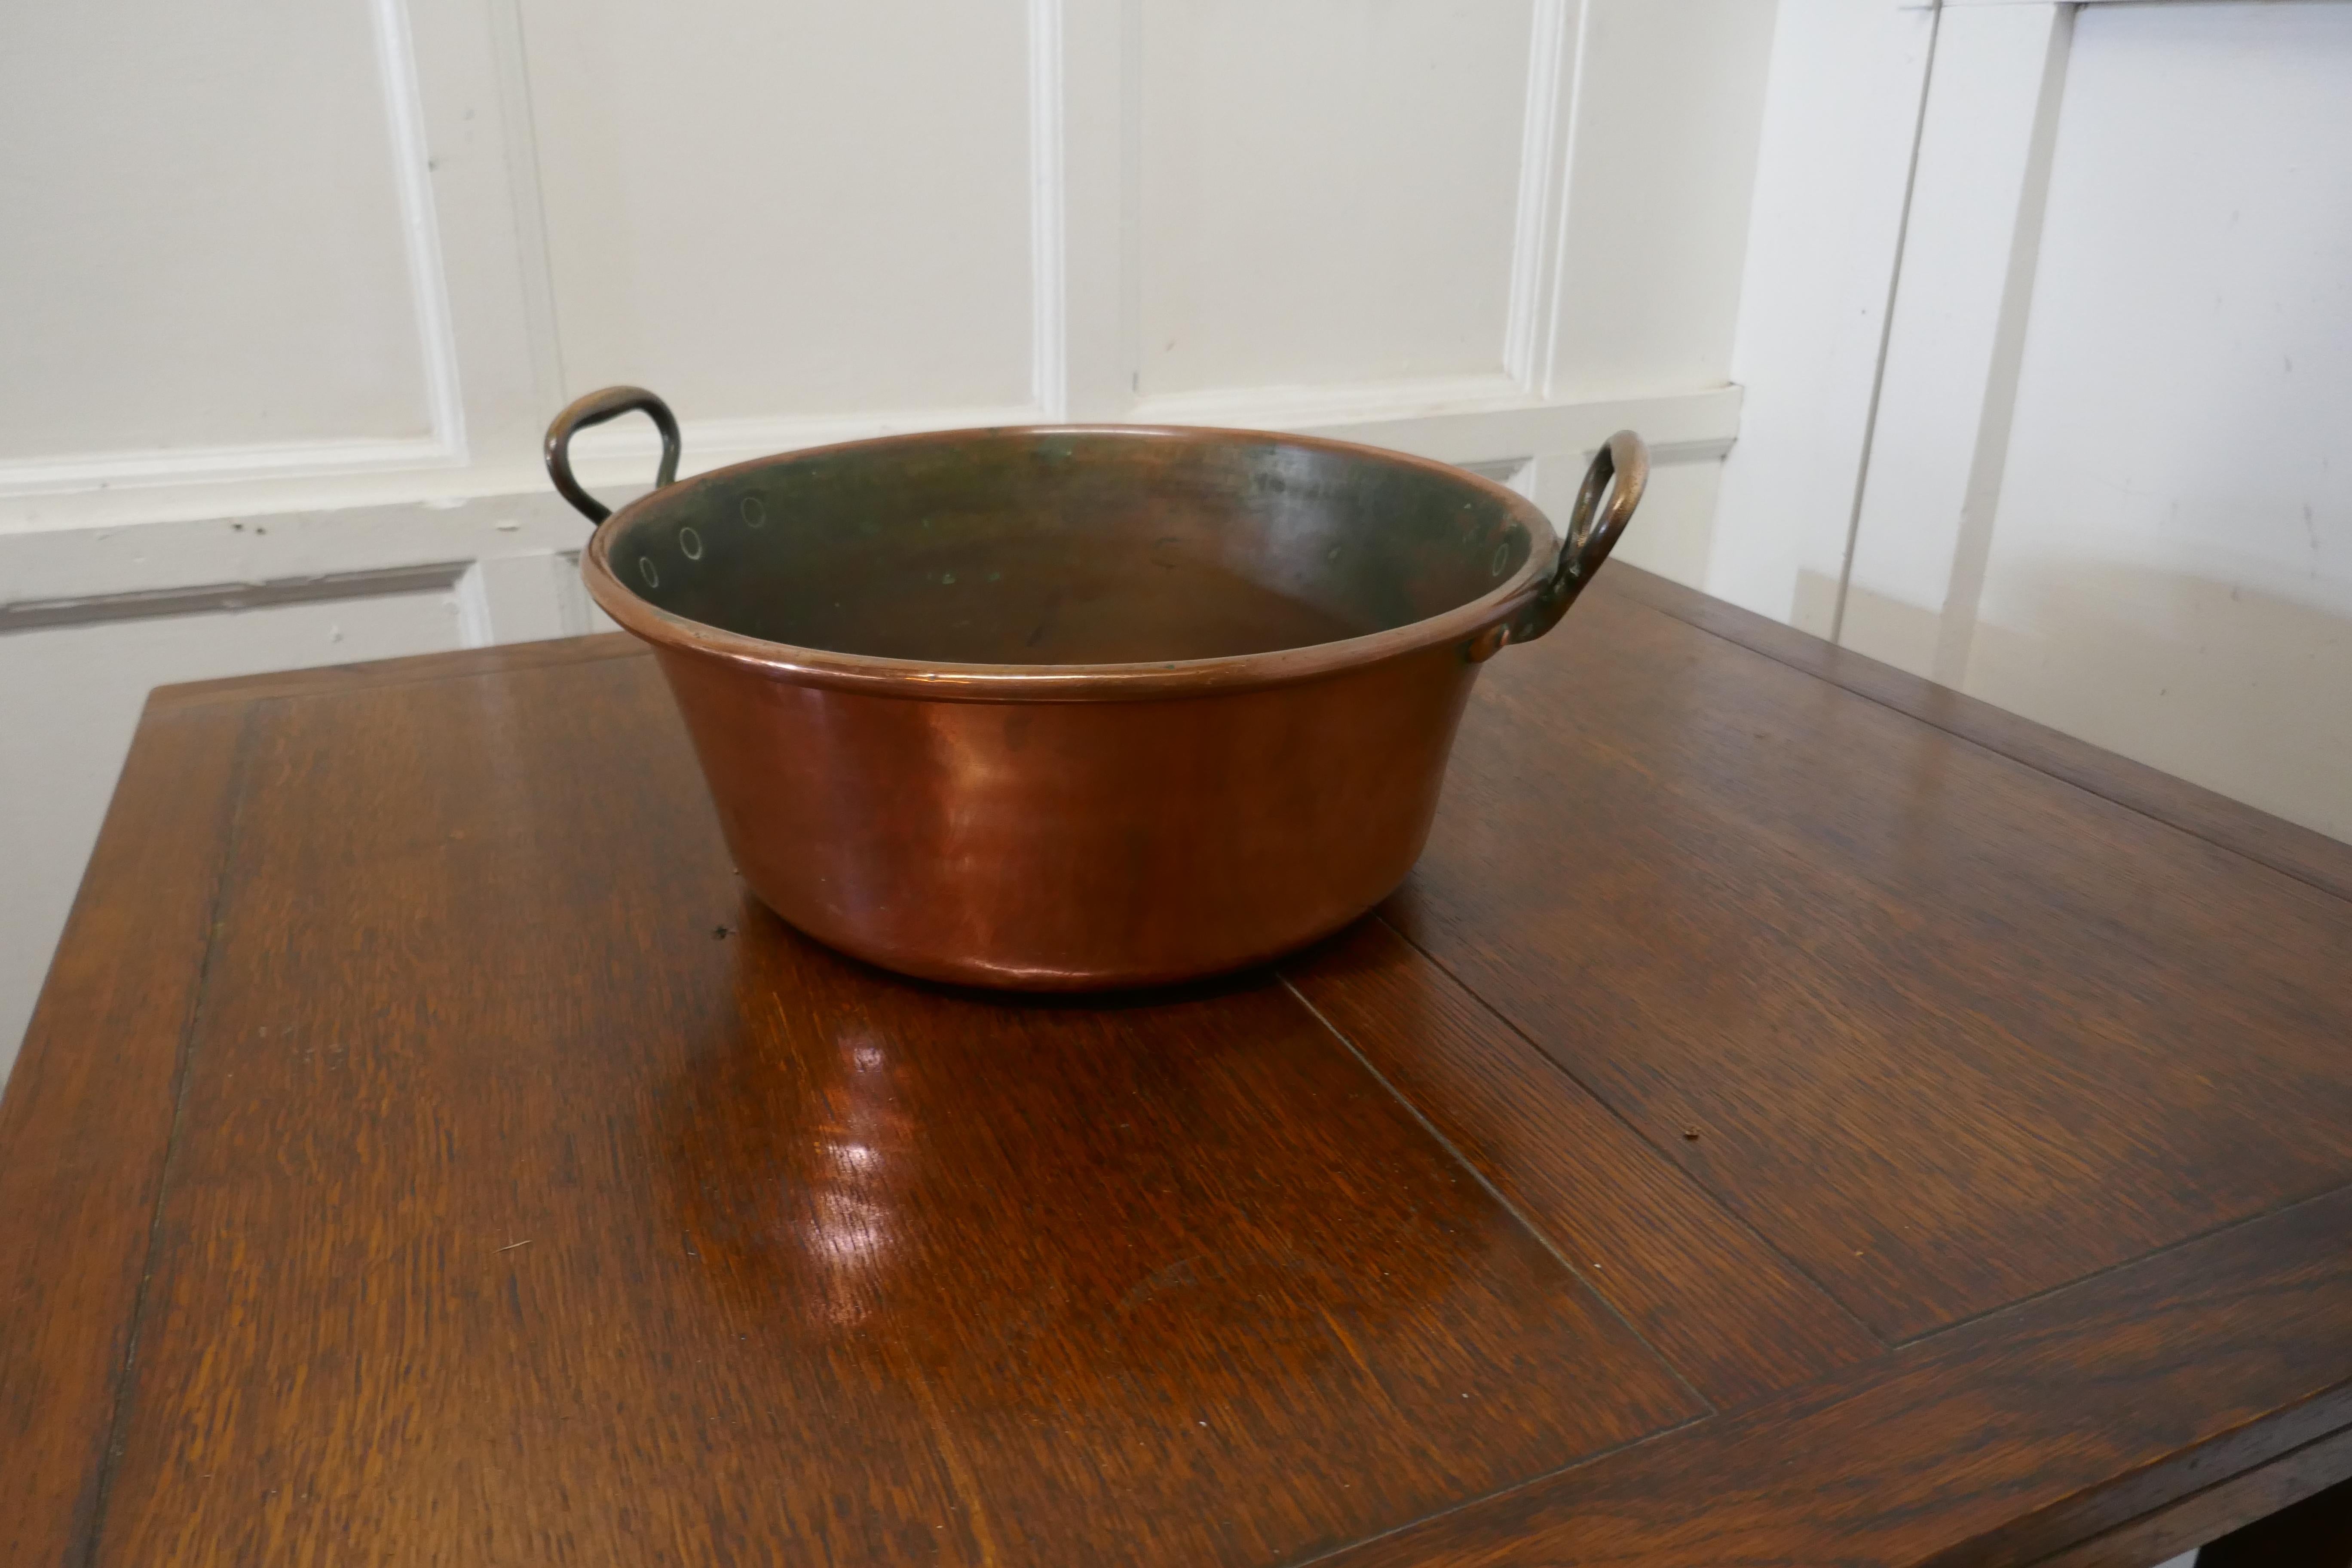 Large 19th century double handled copper pan

This is a lovely looking Pan, the pan was obviously a very treasured piece, it has original Brass handles with robust copper riveting.
 
A pan of this type would have been used in jam making, for